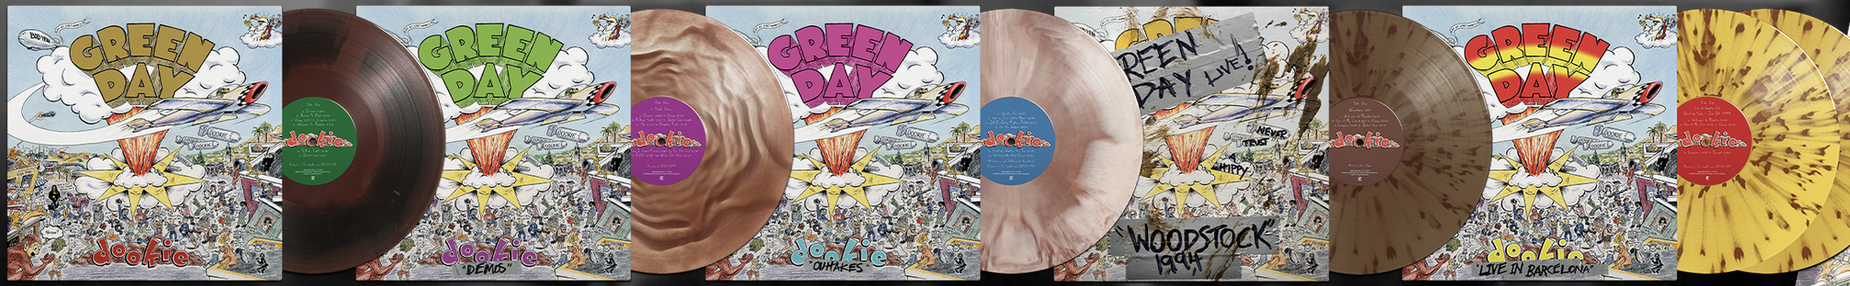 Featured image for “Ready To Feel Old? Green Day Is Releasing A Massive 30th Anniversary “Dookie” Vinyl, Collectibles and Apparel Collection”